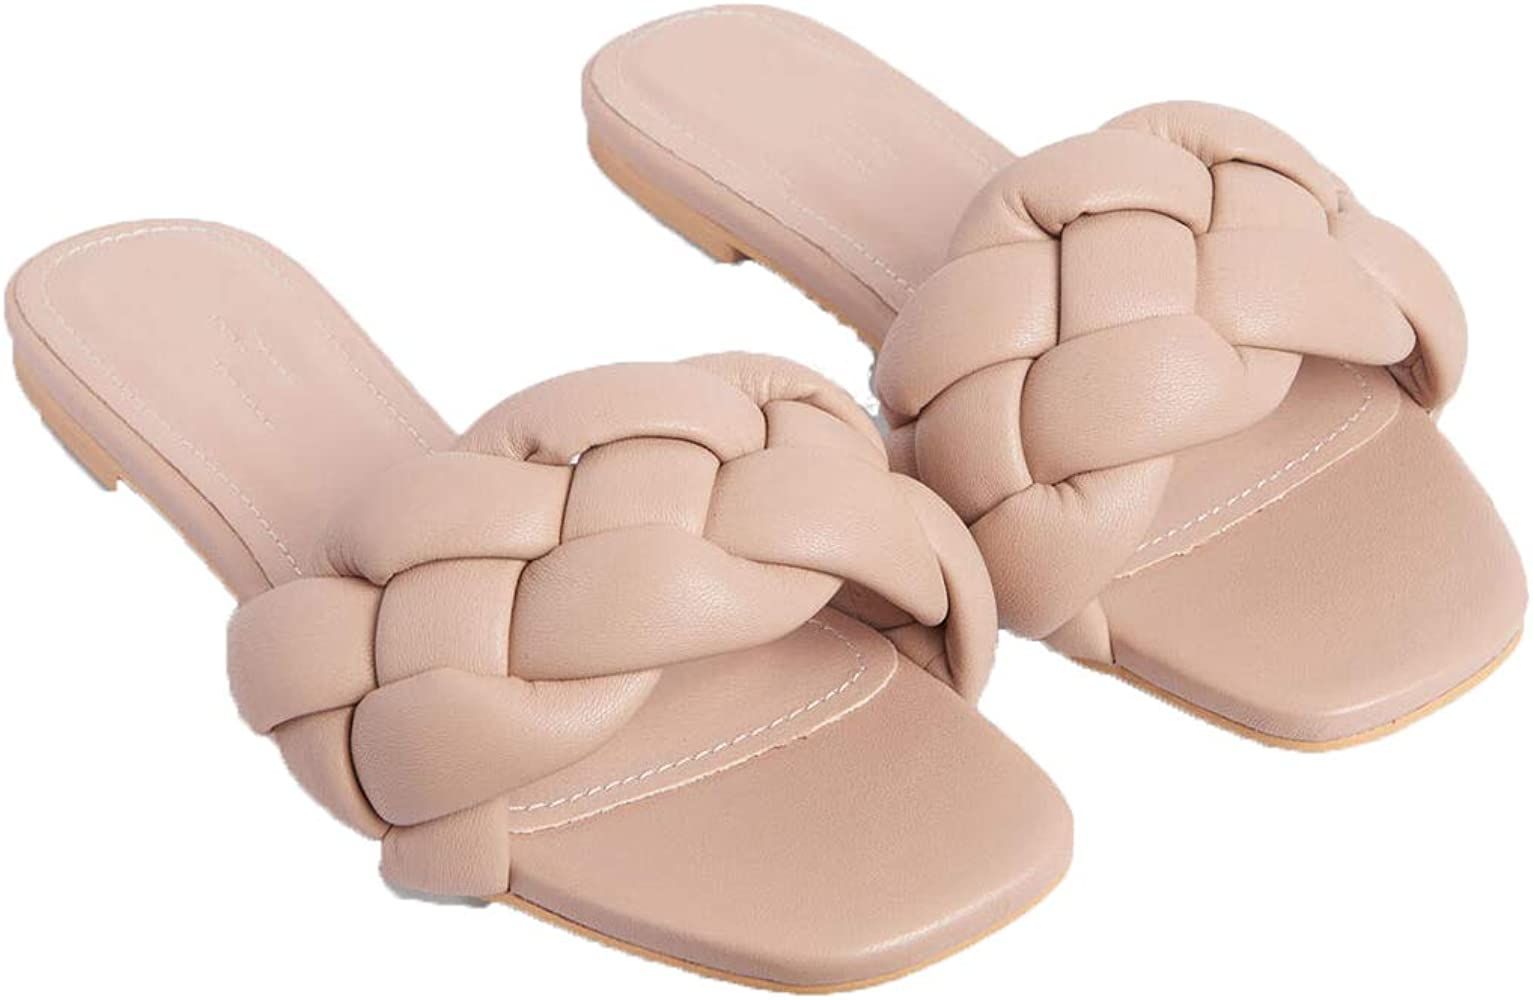 2022 new summer solid color slippers increase woven shoes women sandals.It comes in khaki, orange an | Amazon (US)